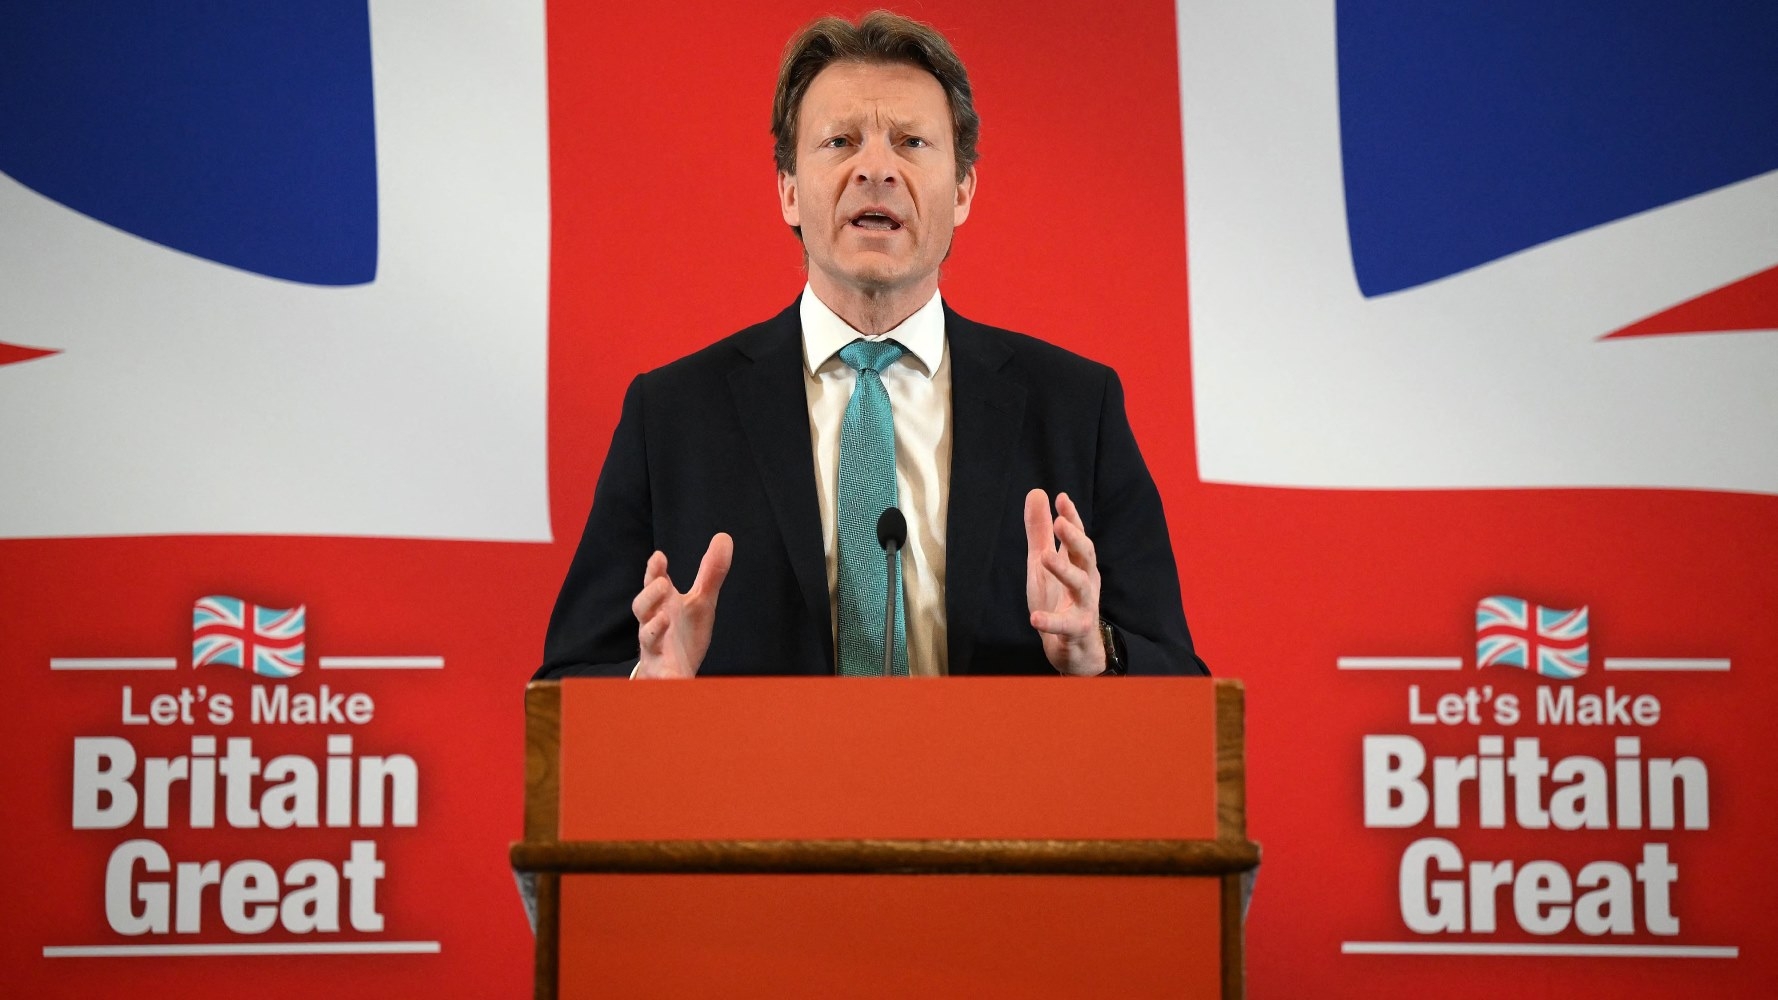 Richard Tice's Reform UK currently polls at around 10 percent but is not expected to win a parliamentary seat (AFP/Daniel Leal)